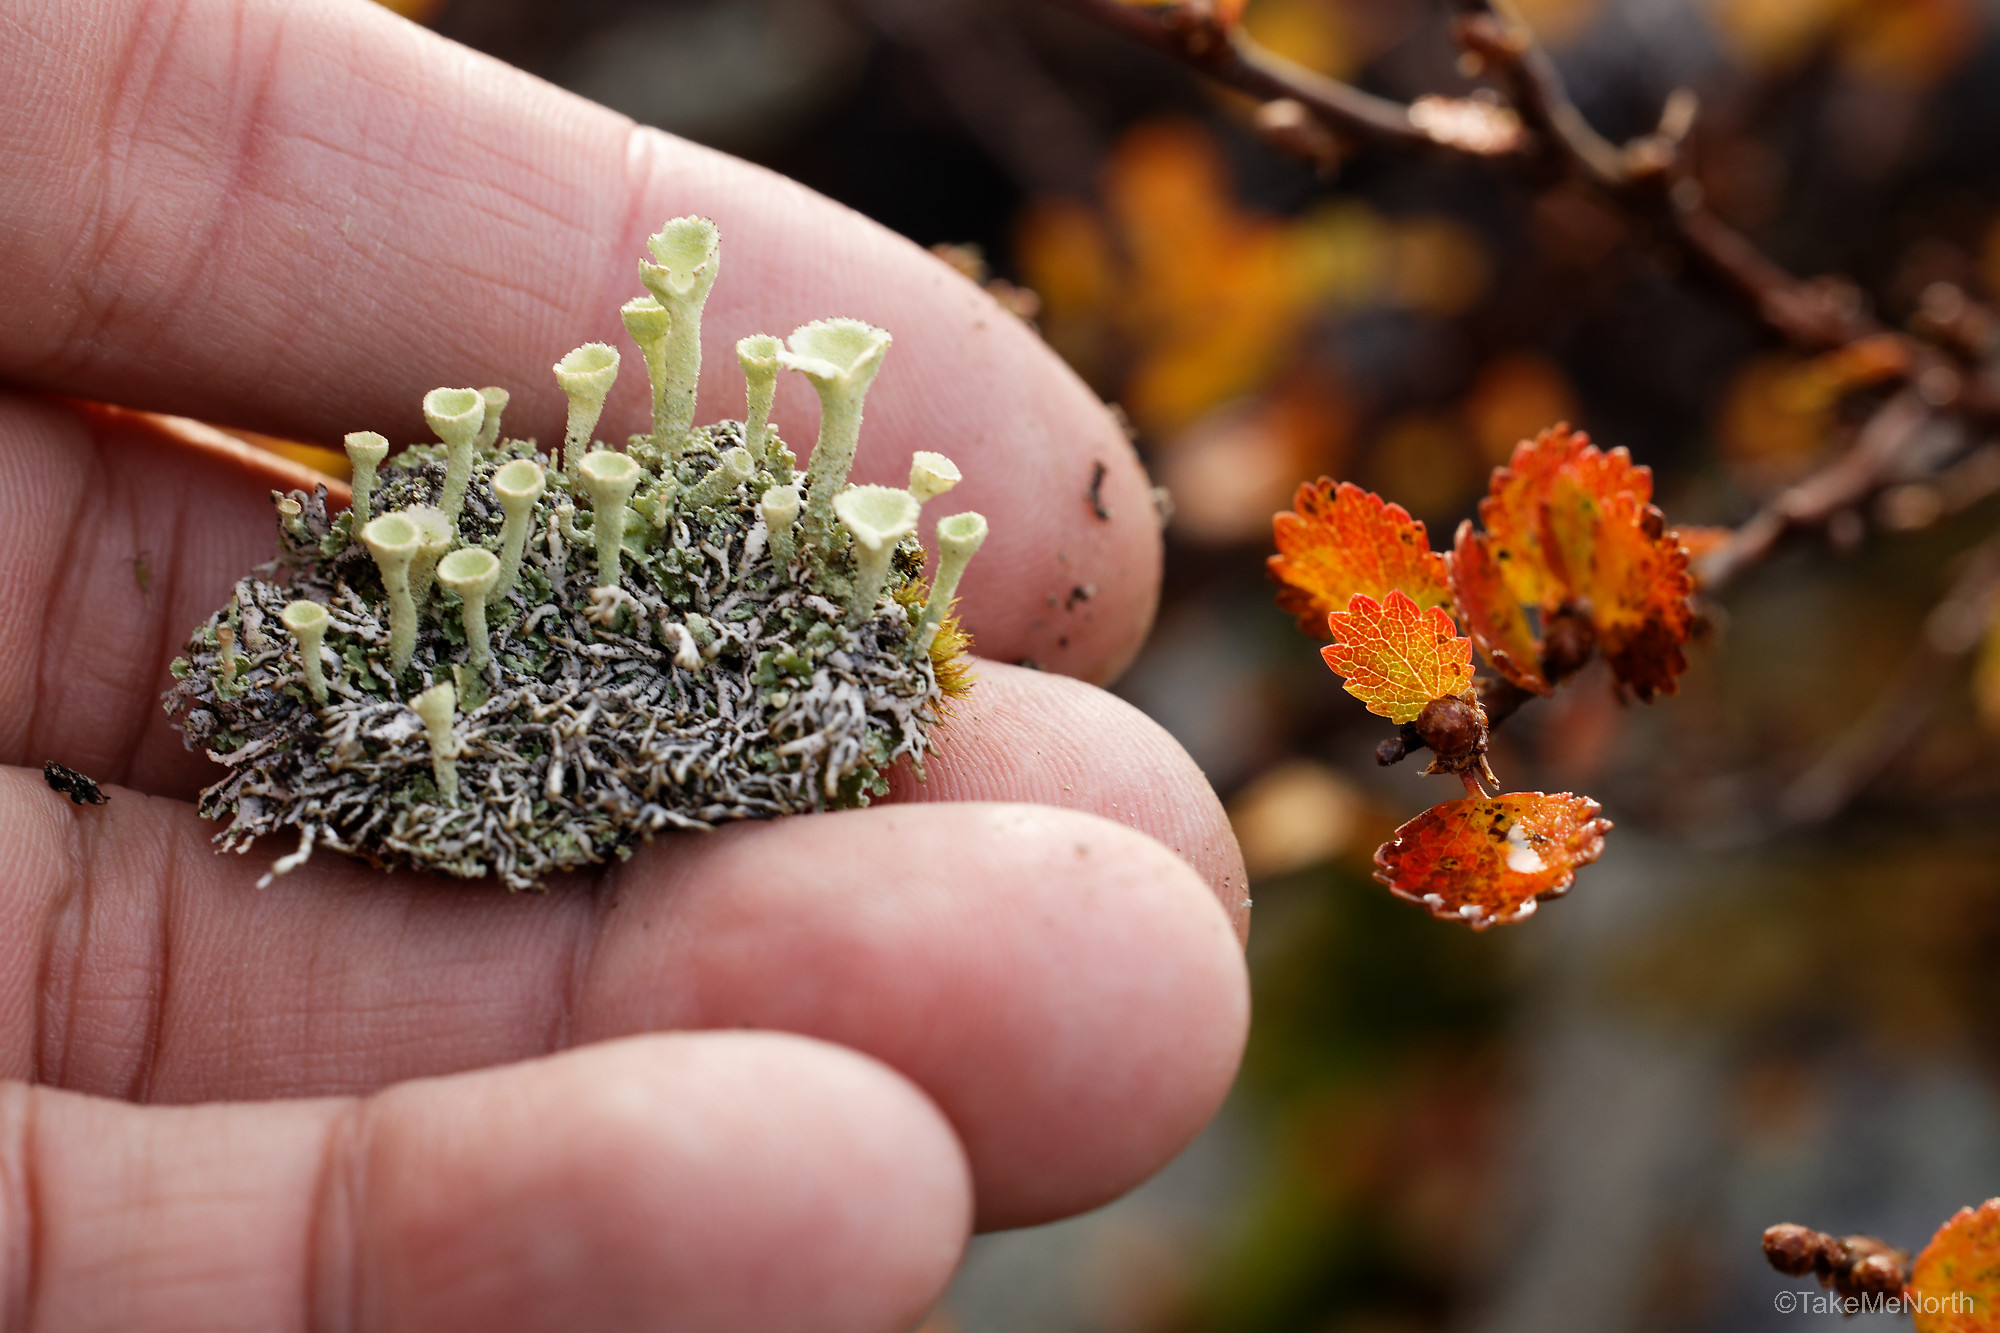 A group of pixie cup lichens that got detached from its substrate